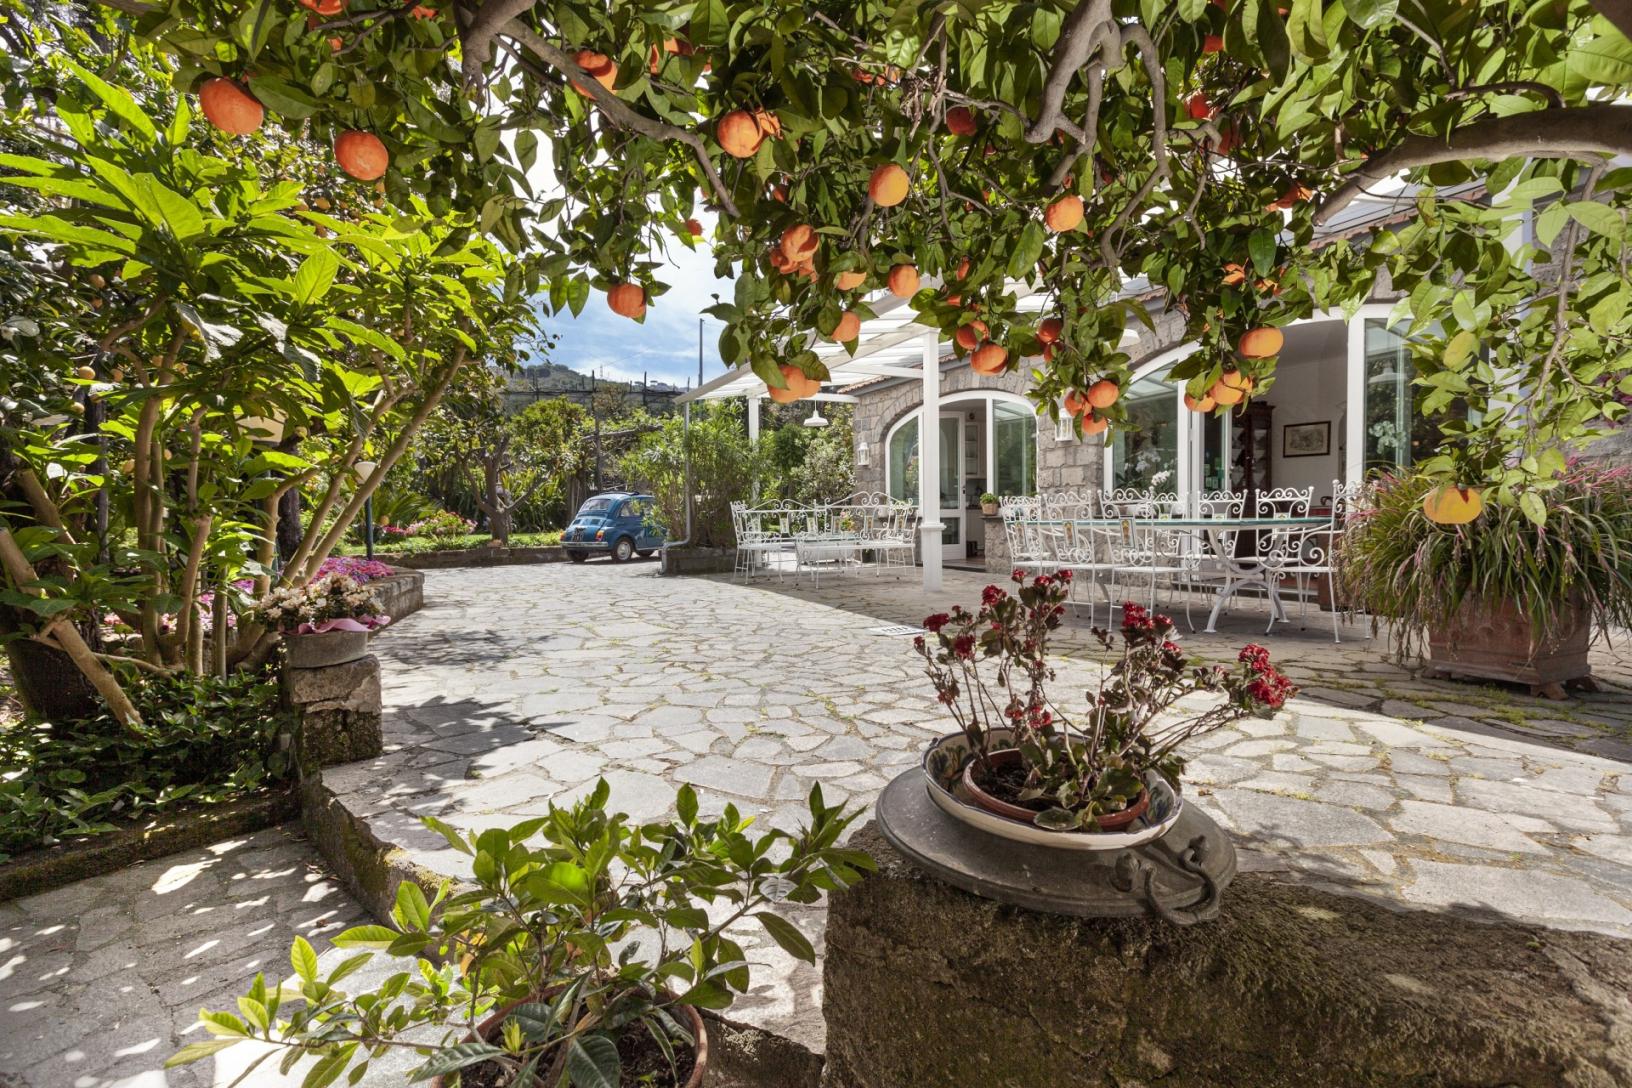 Visit our typical Sorrento garden with lemon grove-41